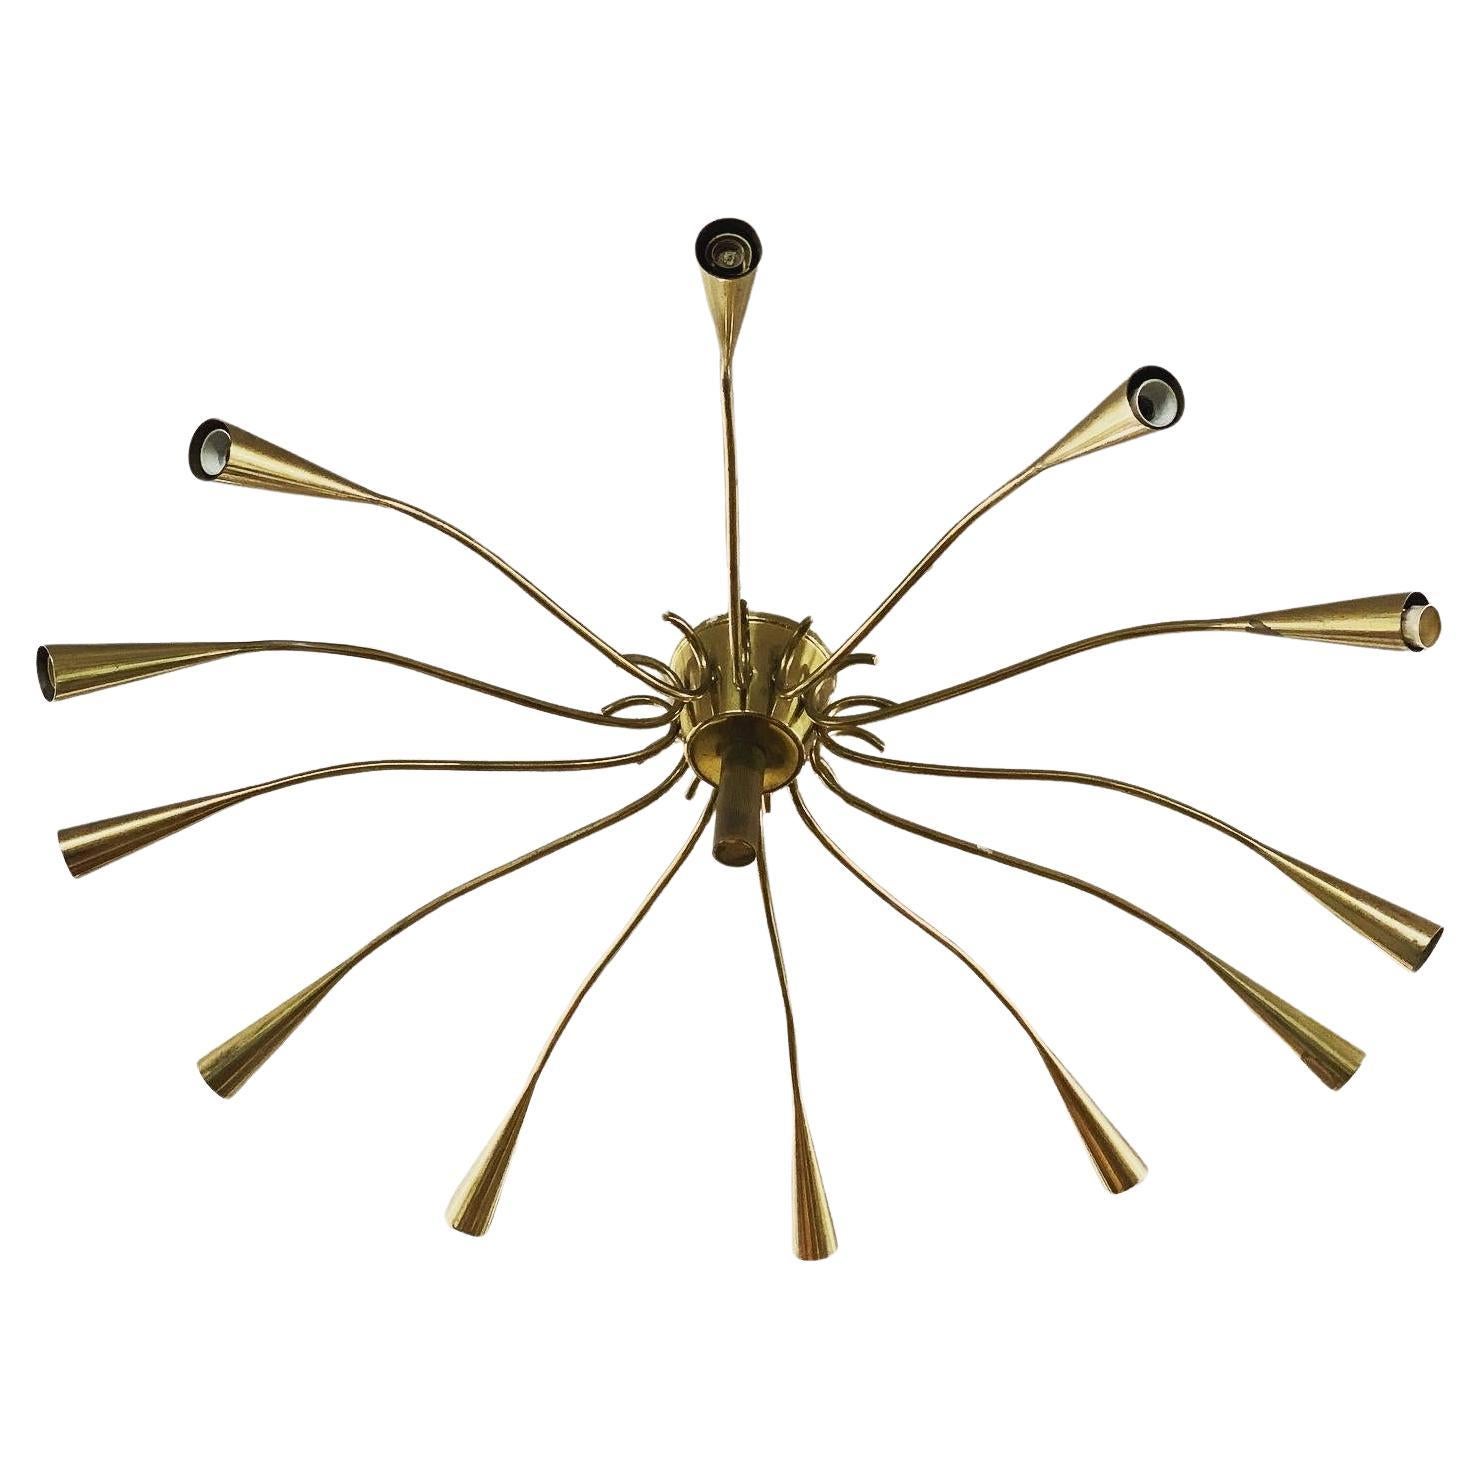 12-Arm Spoked Chandelier Entirely in Brass - Italy 1950s